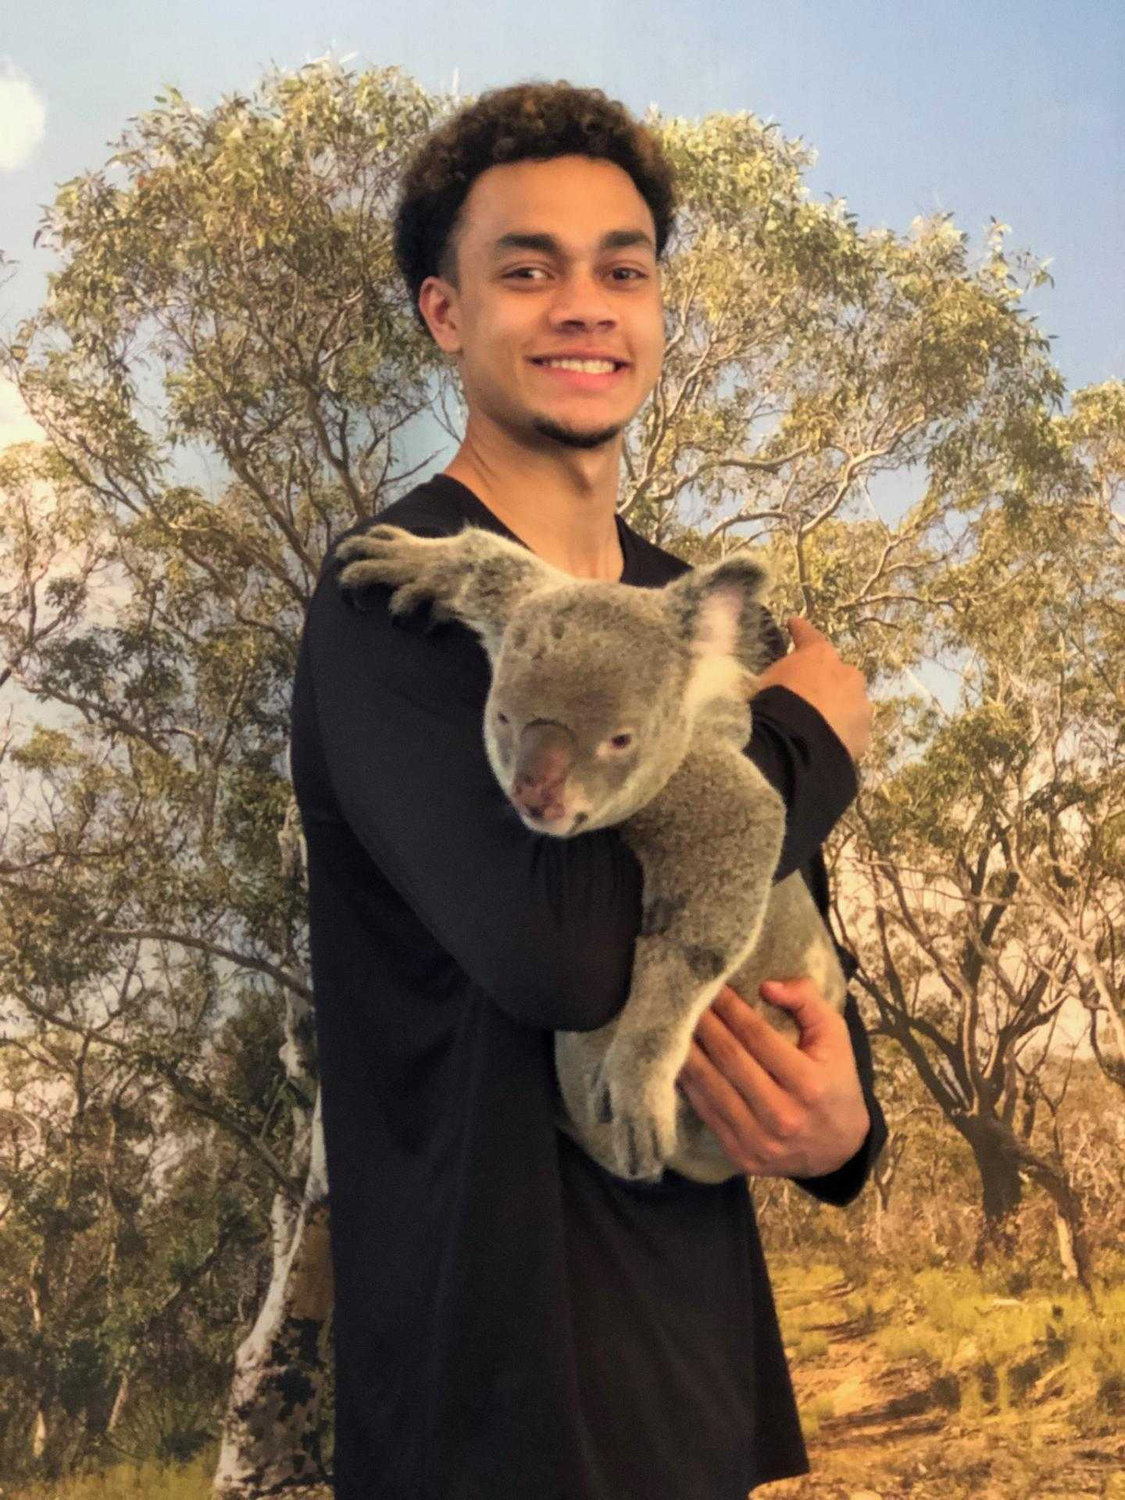 Jordan Thomas, a 2018 W.F. West High School graduate, poses with a koala bear on a trip to Australia he made last spring with the Pacific Lutheran University men's basketball team.